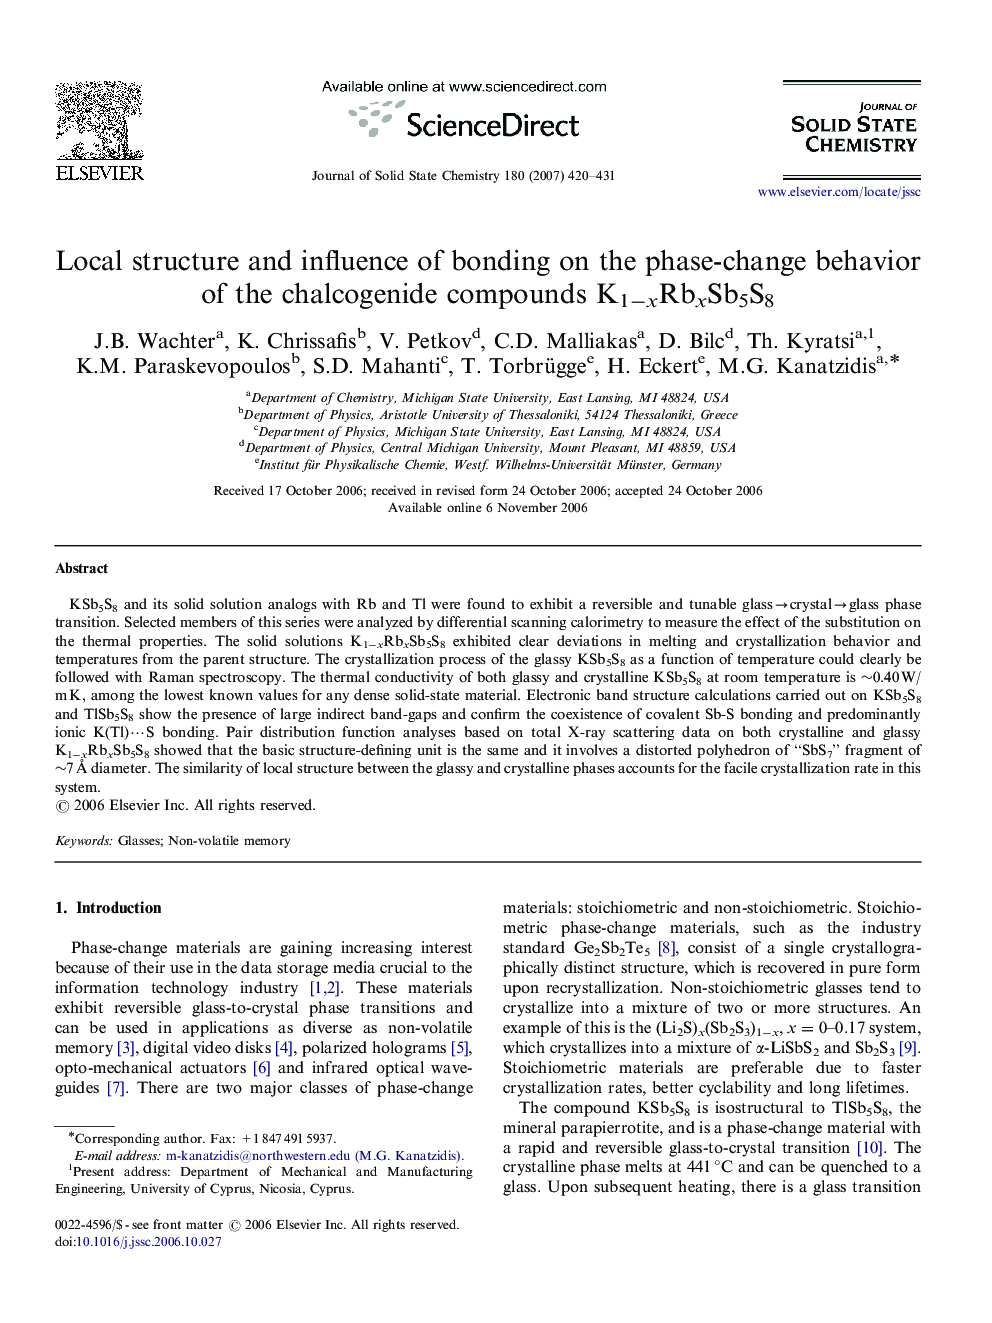 Local structure and influence of bonding on the phase-change behavior of the chalcogenide compounds K1−xRbxSb5S8